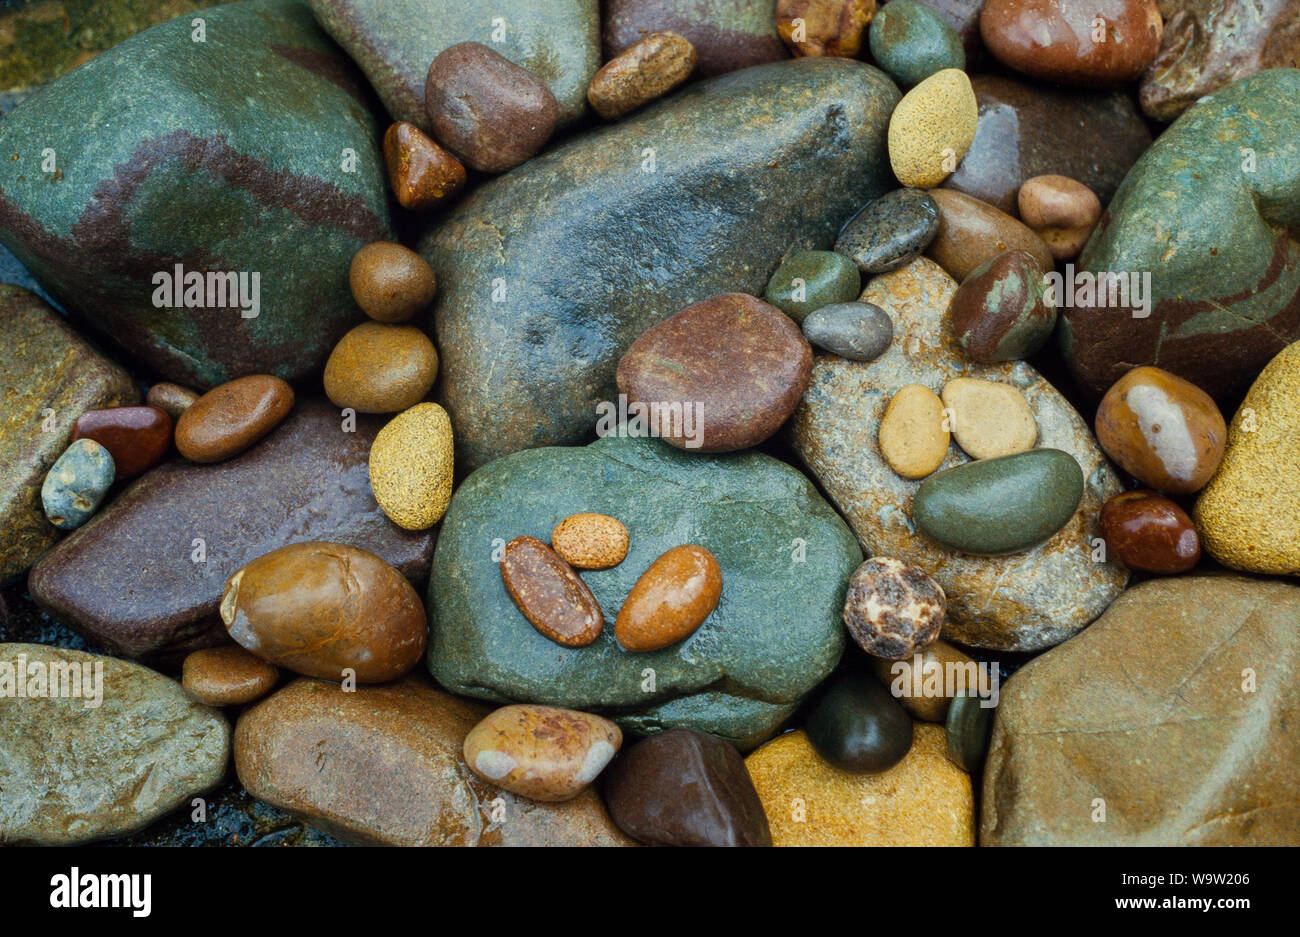 Wet stone pebbles from a beach, varied minerals show different colours Stock Photo